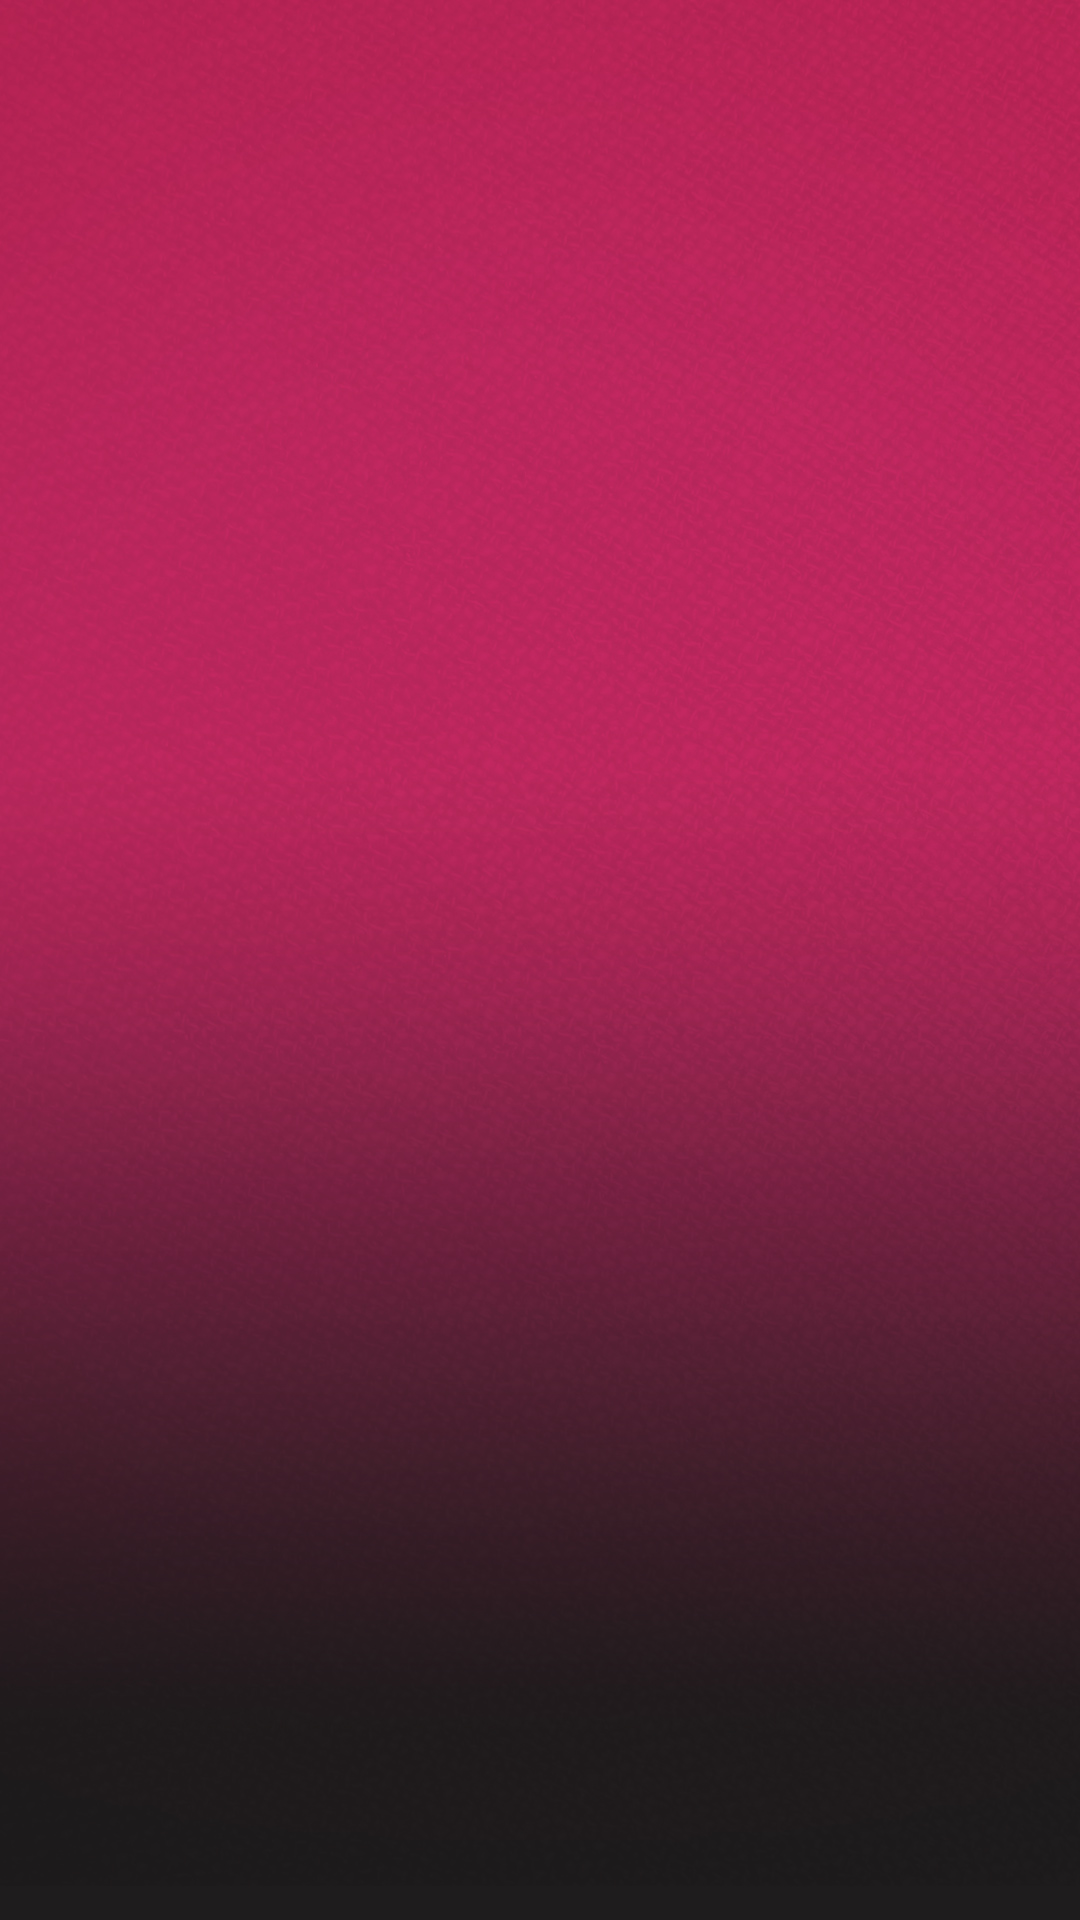 2018 Flamingos Mobile Background - Jersey